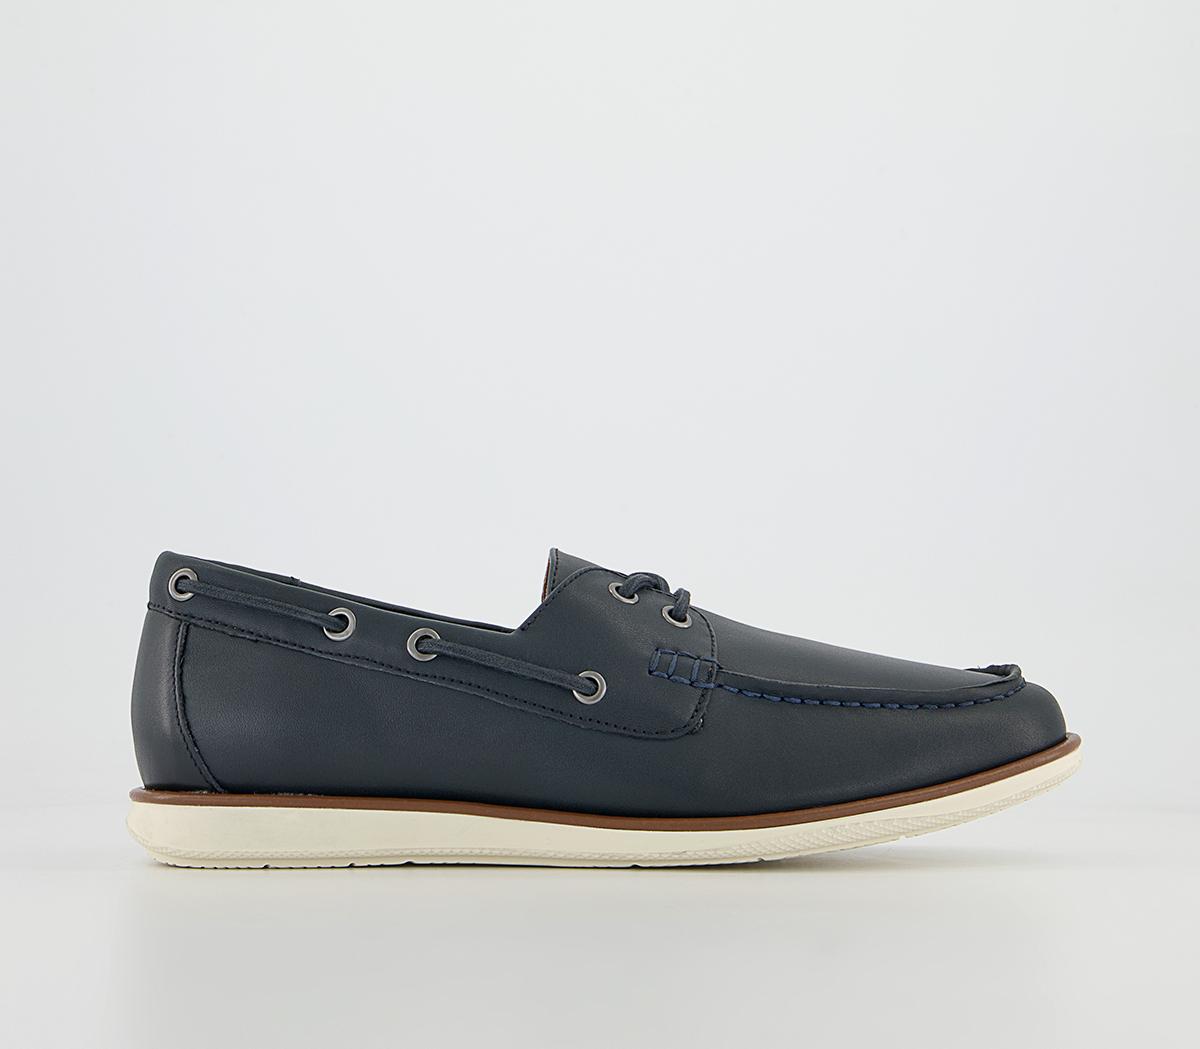 OFFICECarlow Premium Boat ShoesNavy Leather